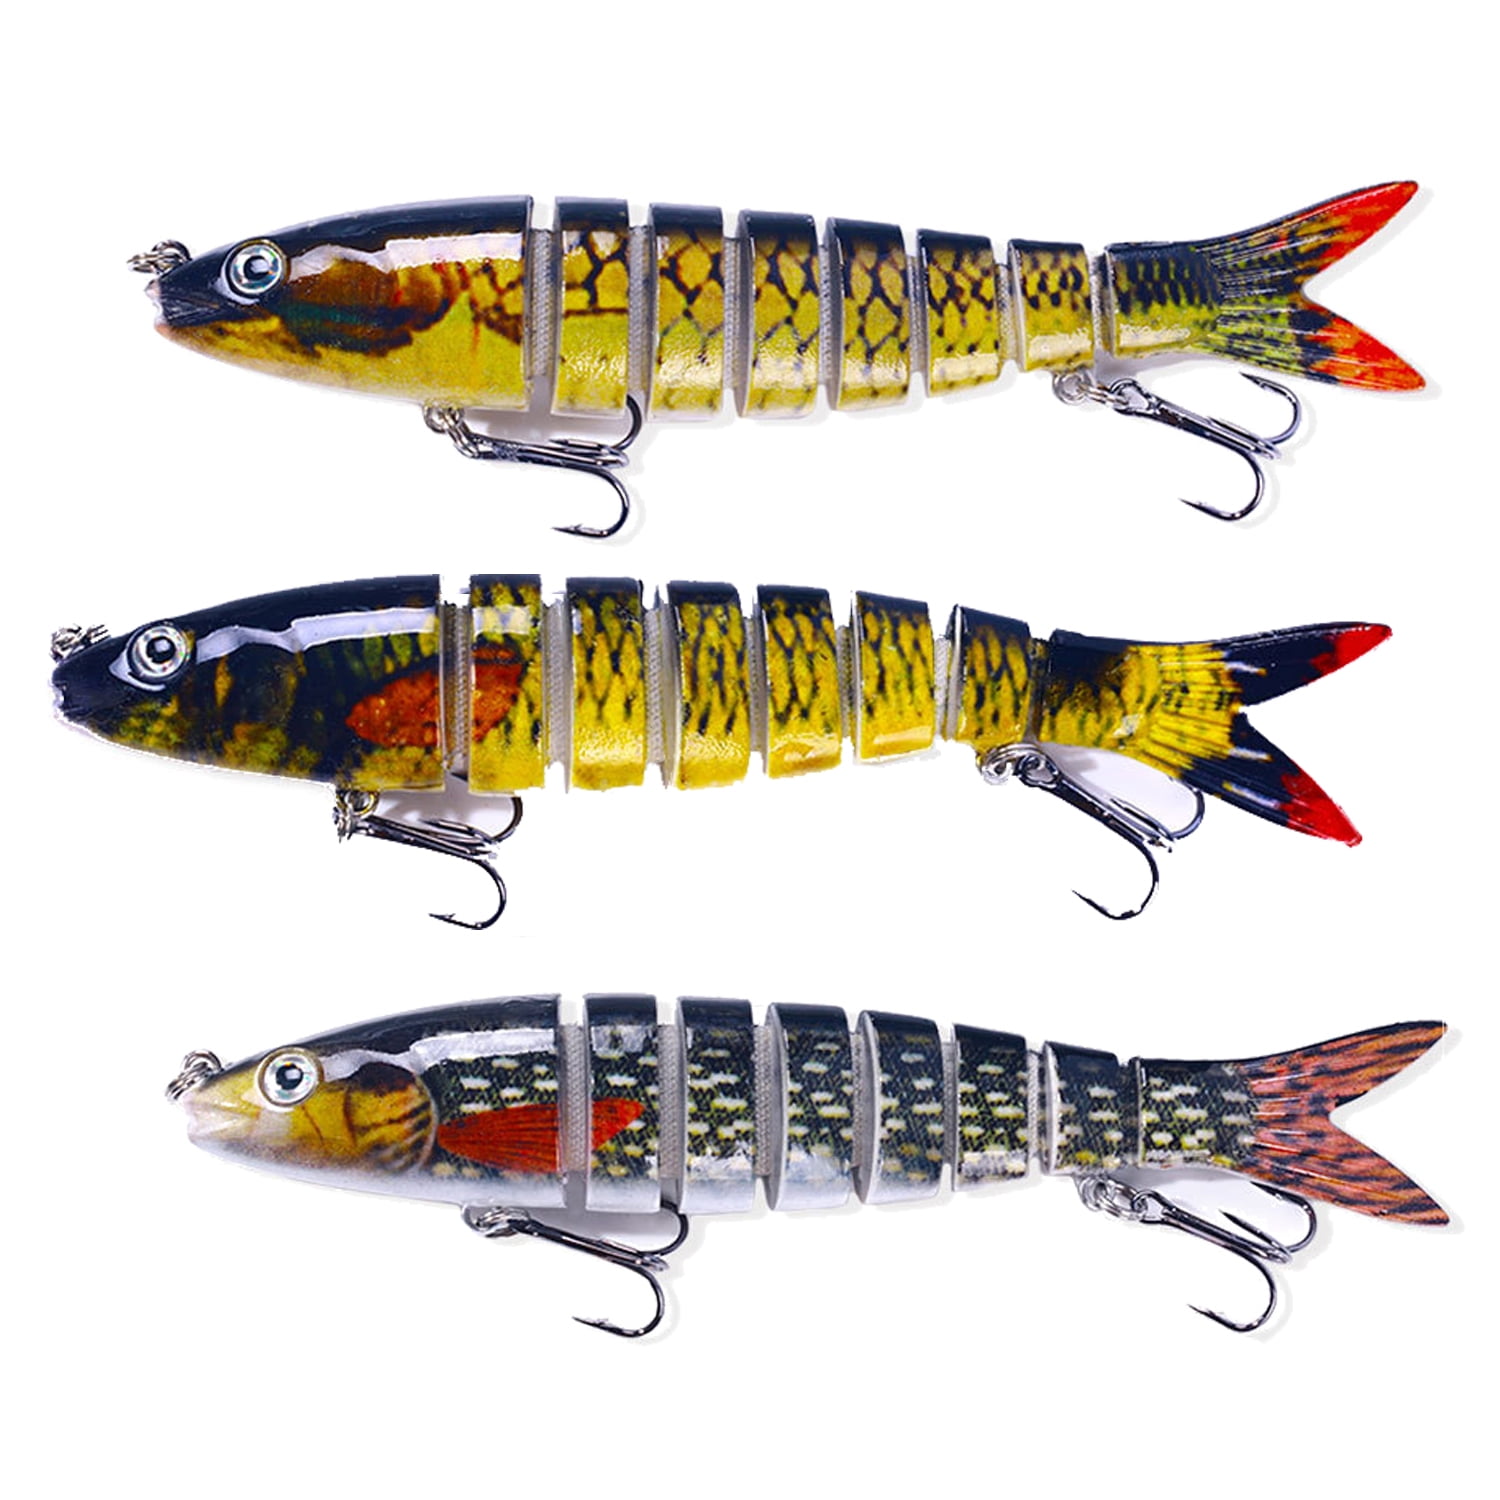 3Pcs Fishing Lures for Bass, Topwater Trout Lures, Multi Jointed